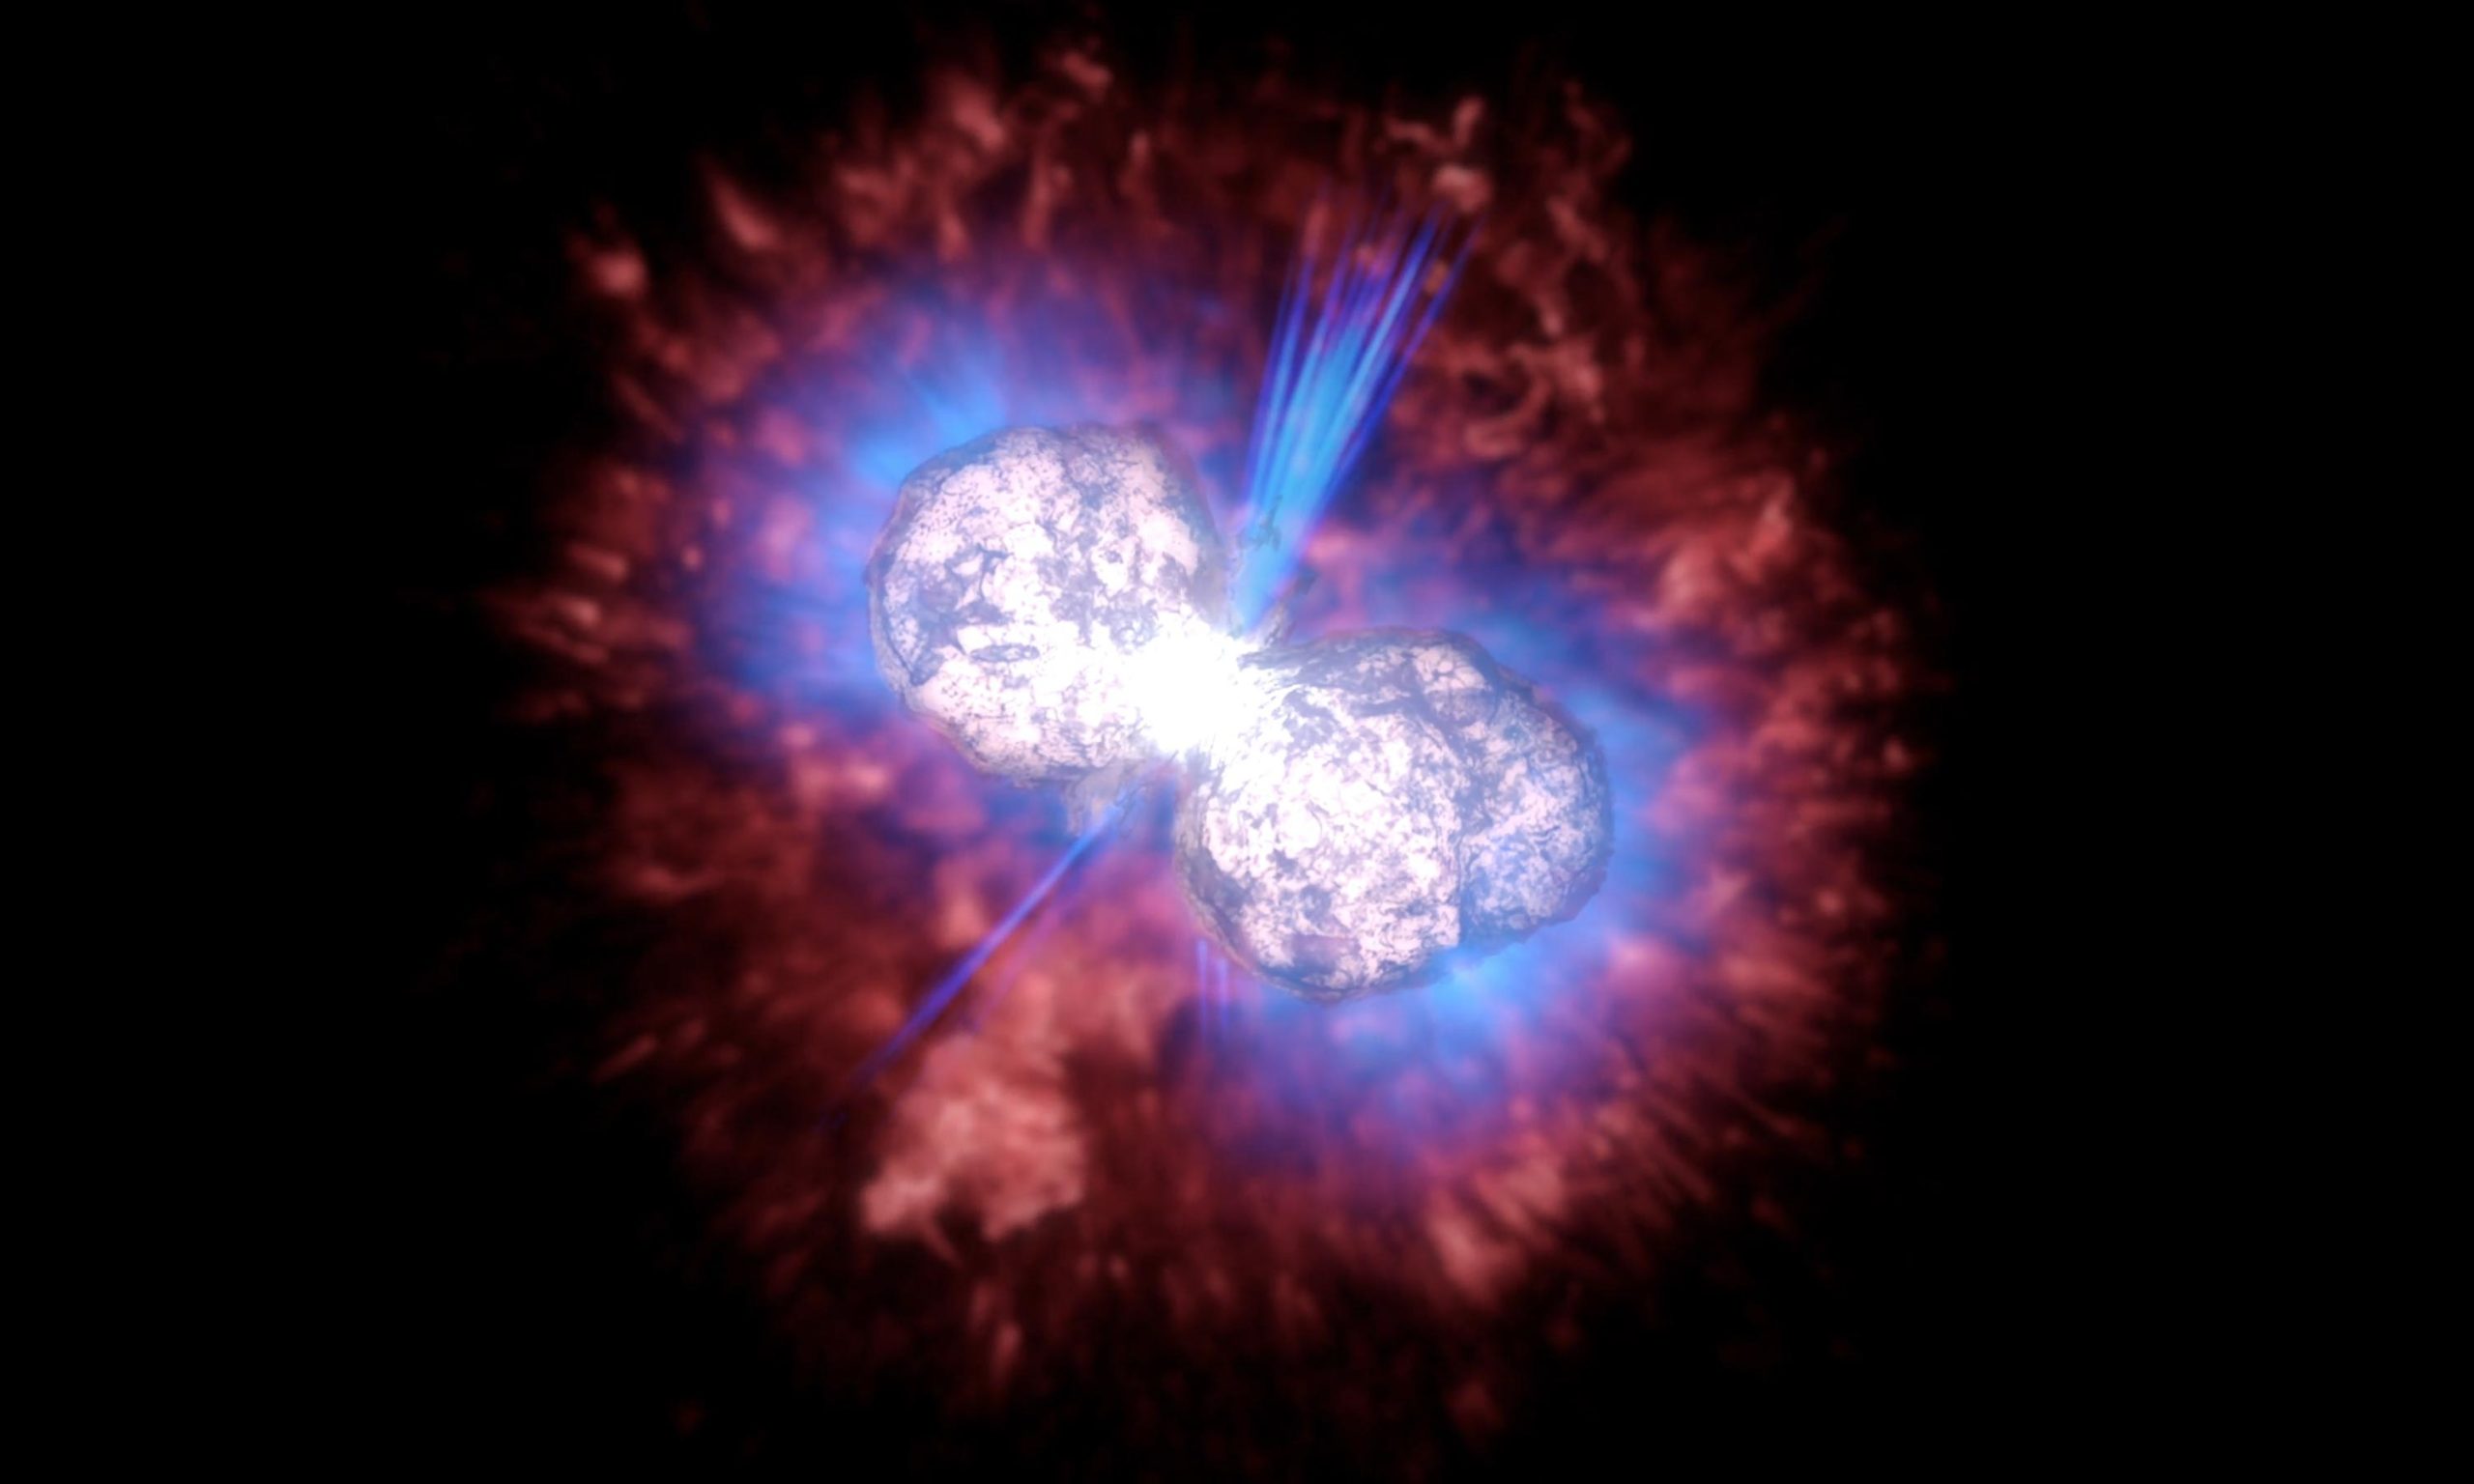 Eta Carinae: The Great Eruption of a Massive Star – Stunning New Astronomical Visualization – SciTechDaily